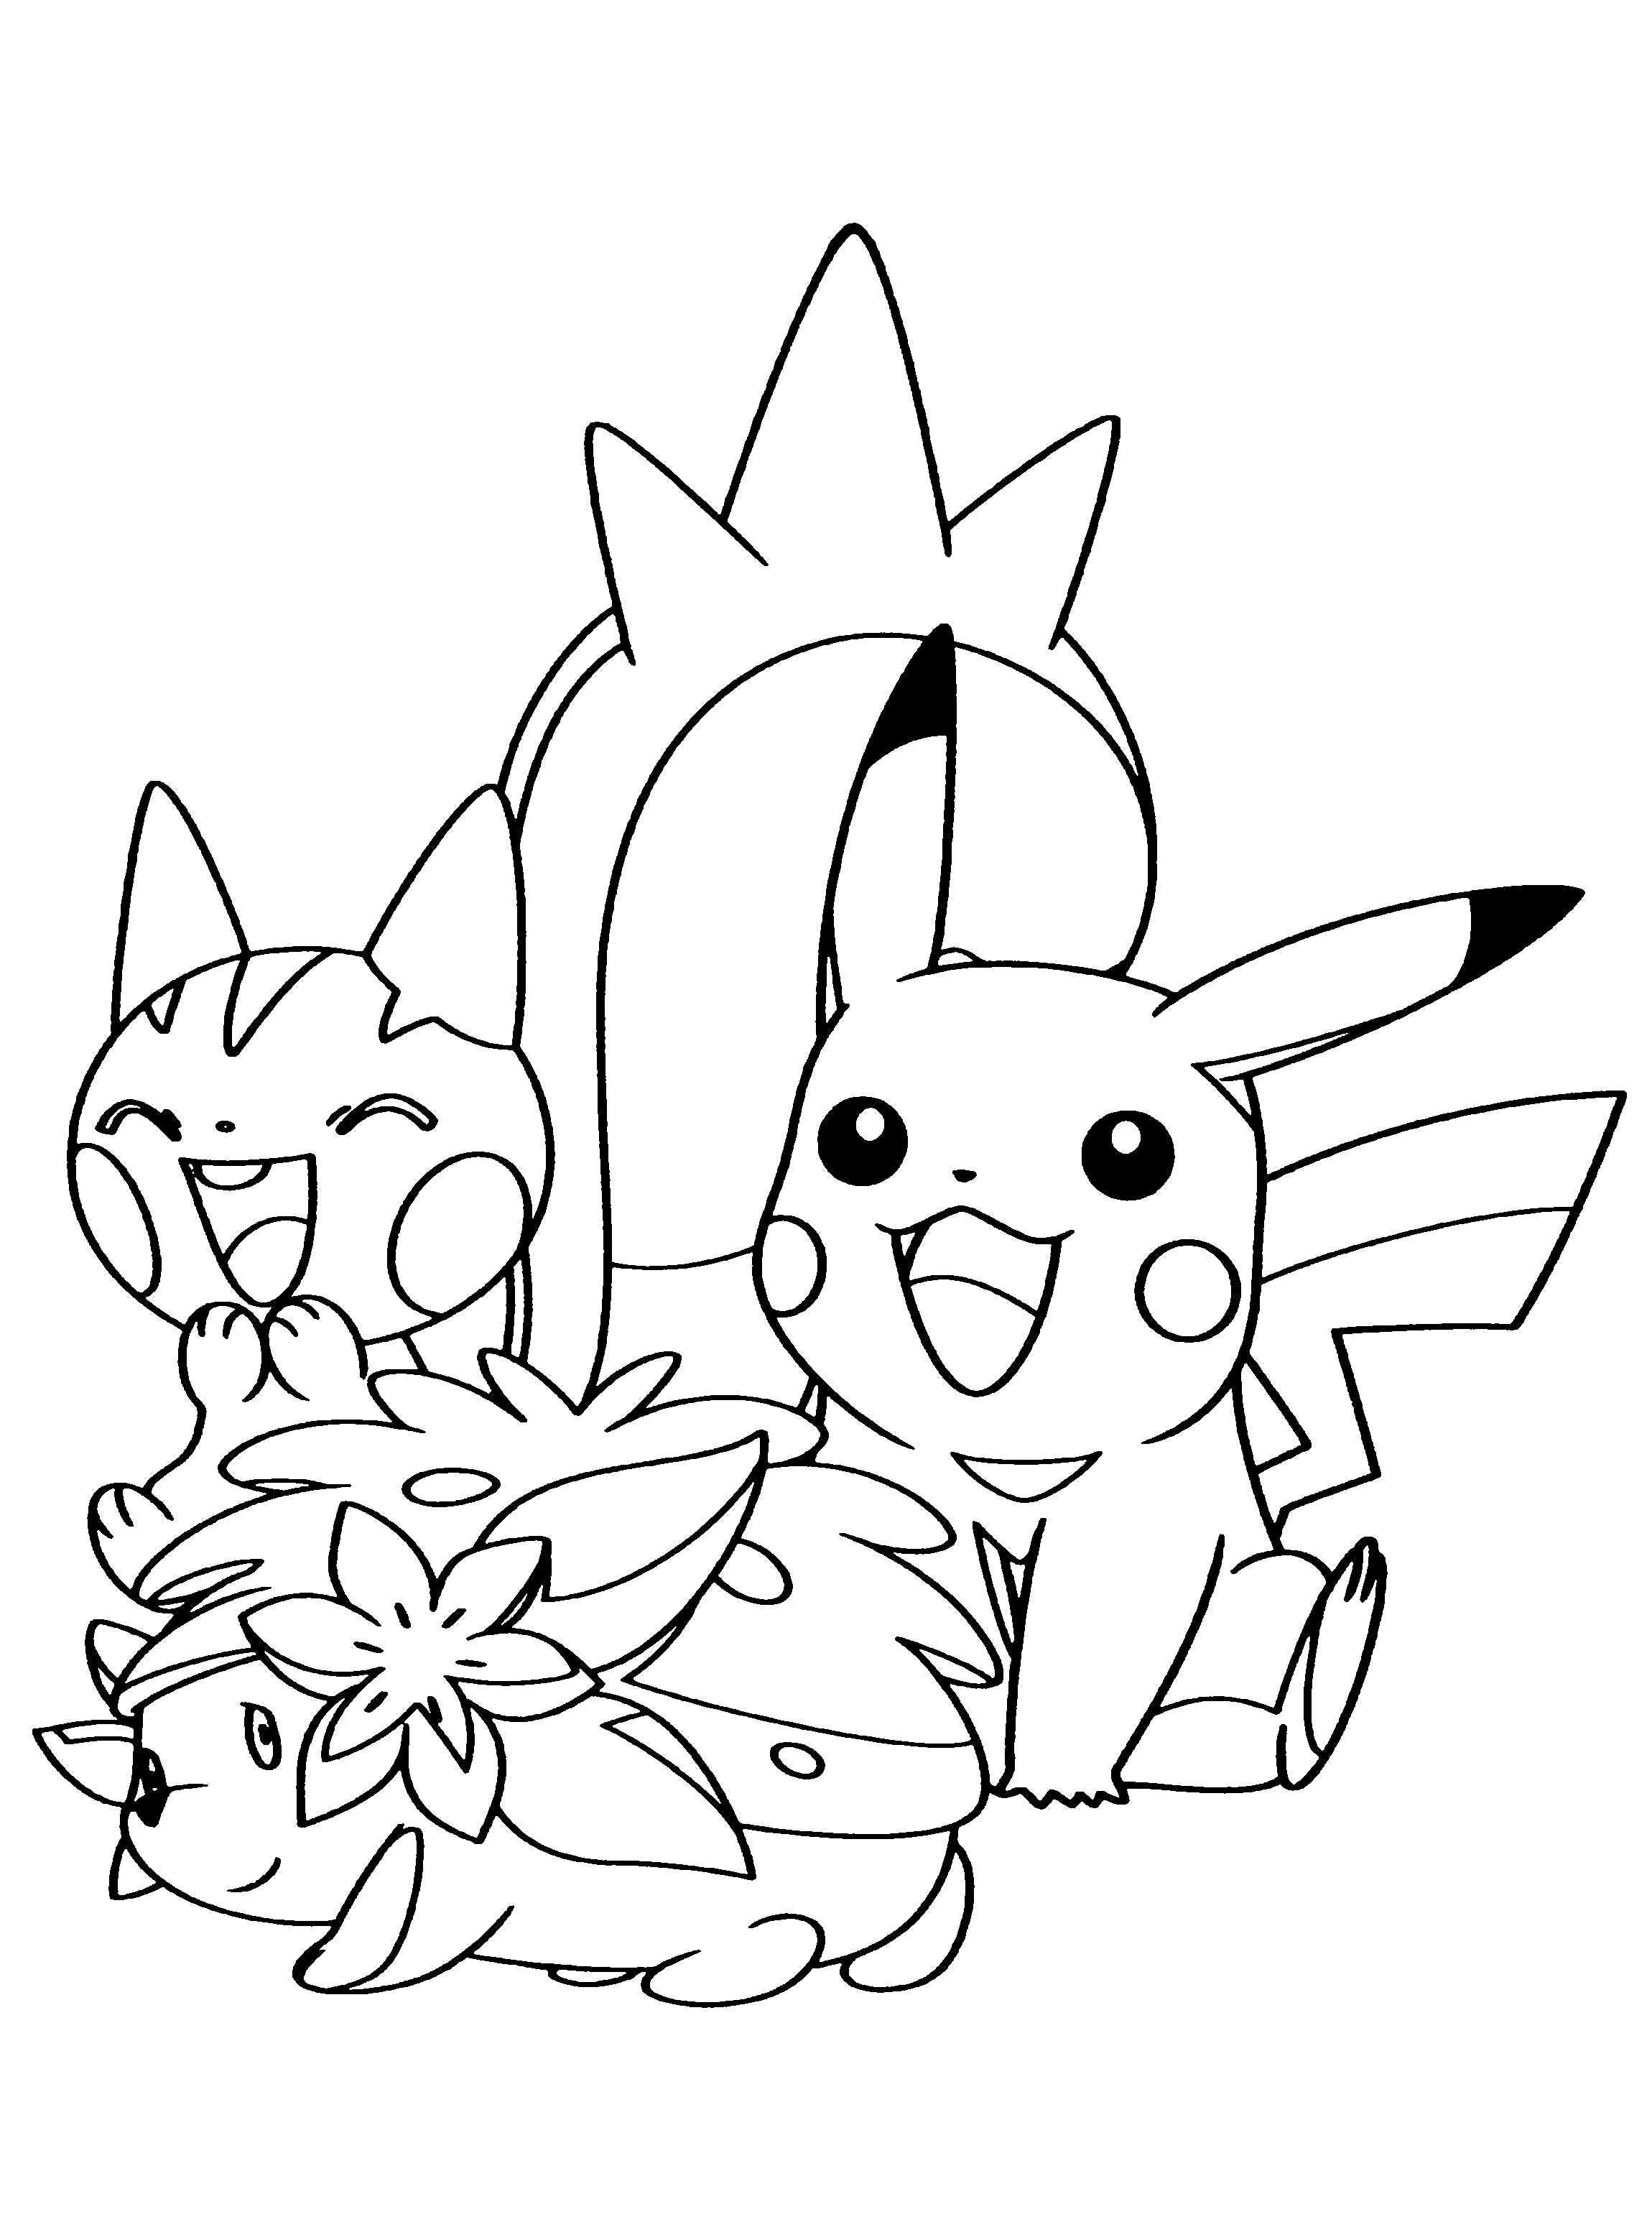 animated-coloring-pages-pokemon-image-0265